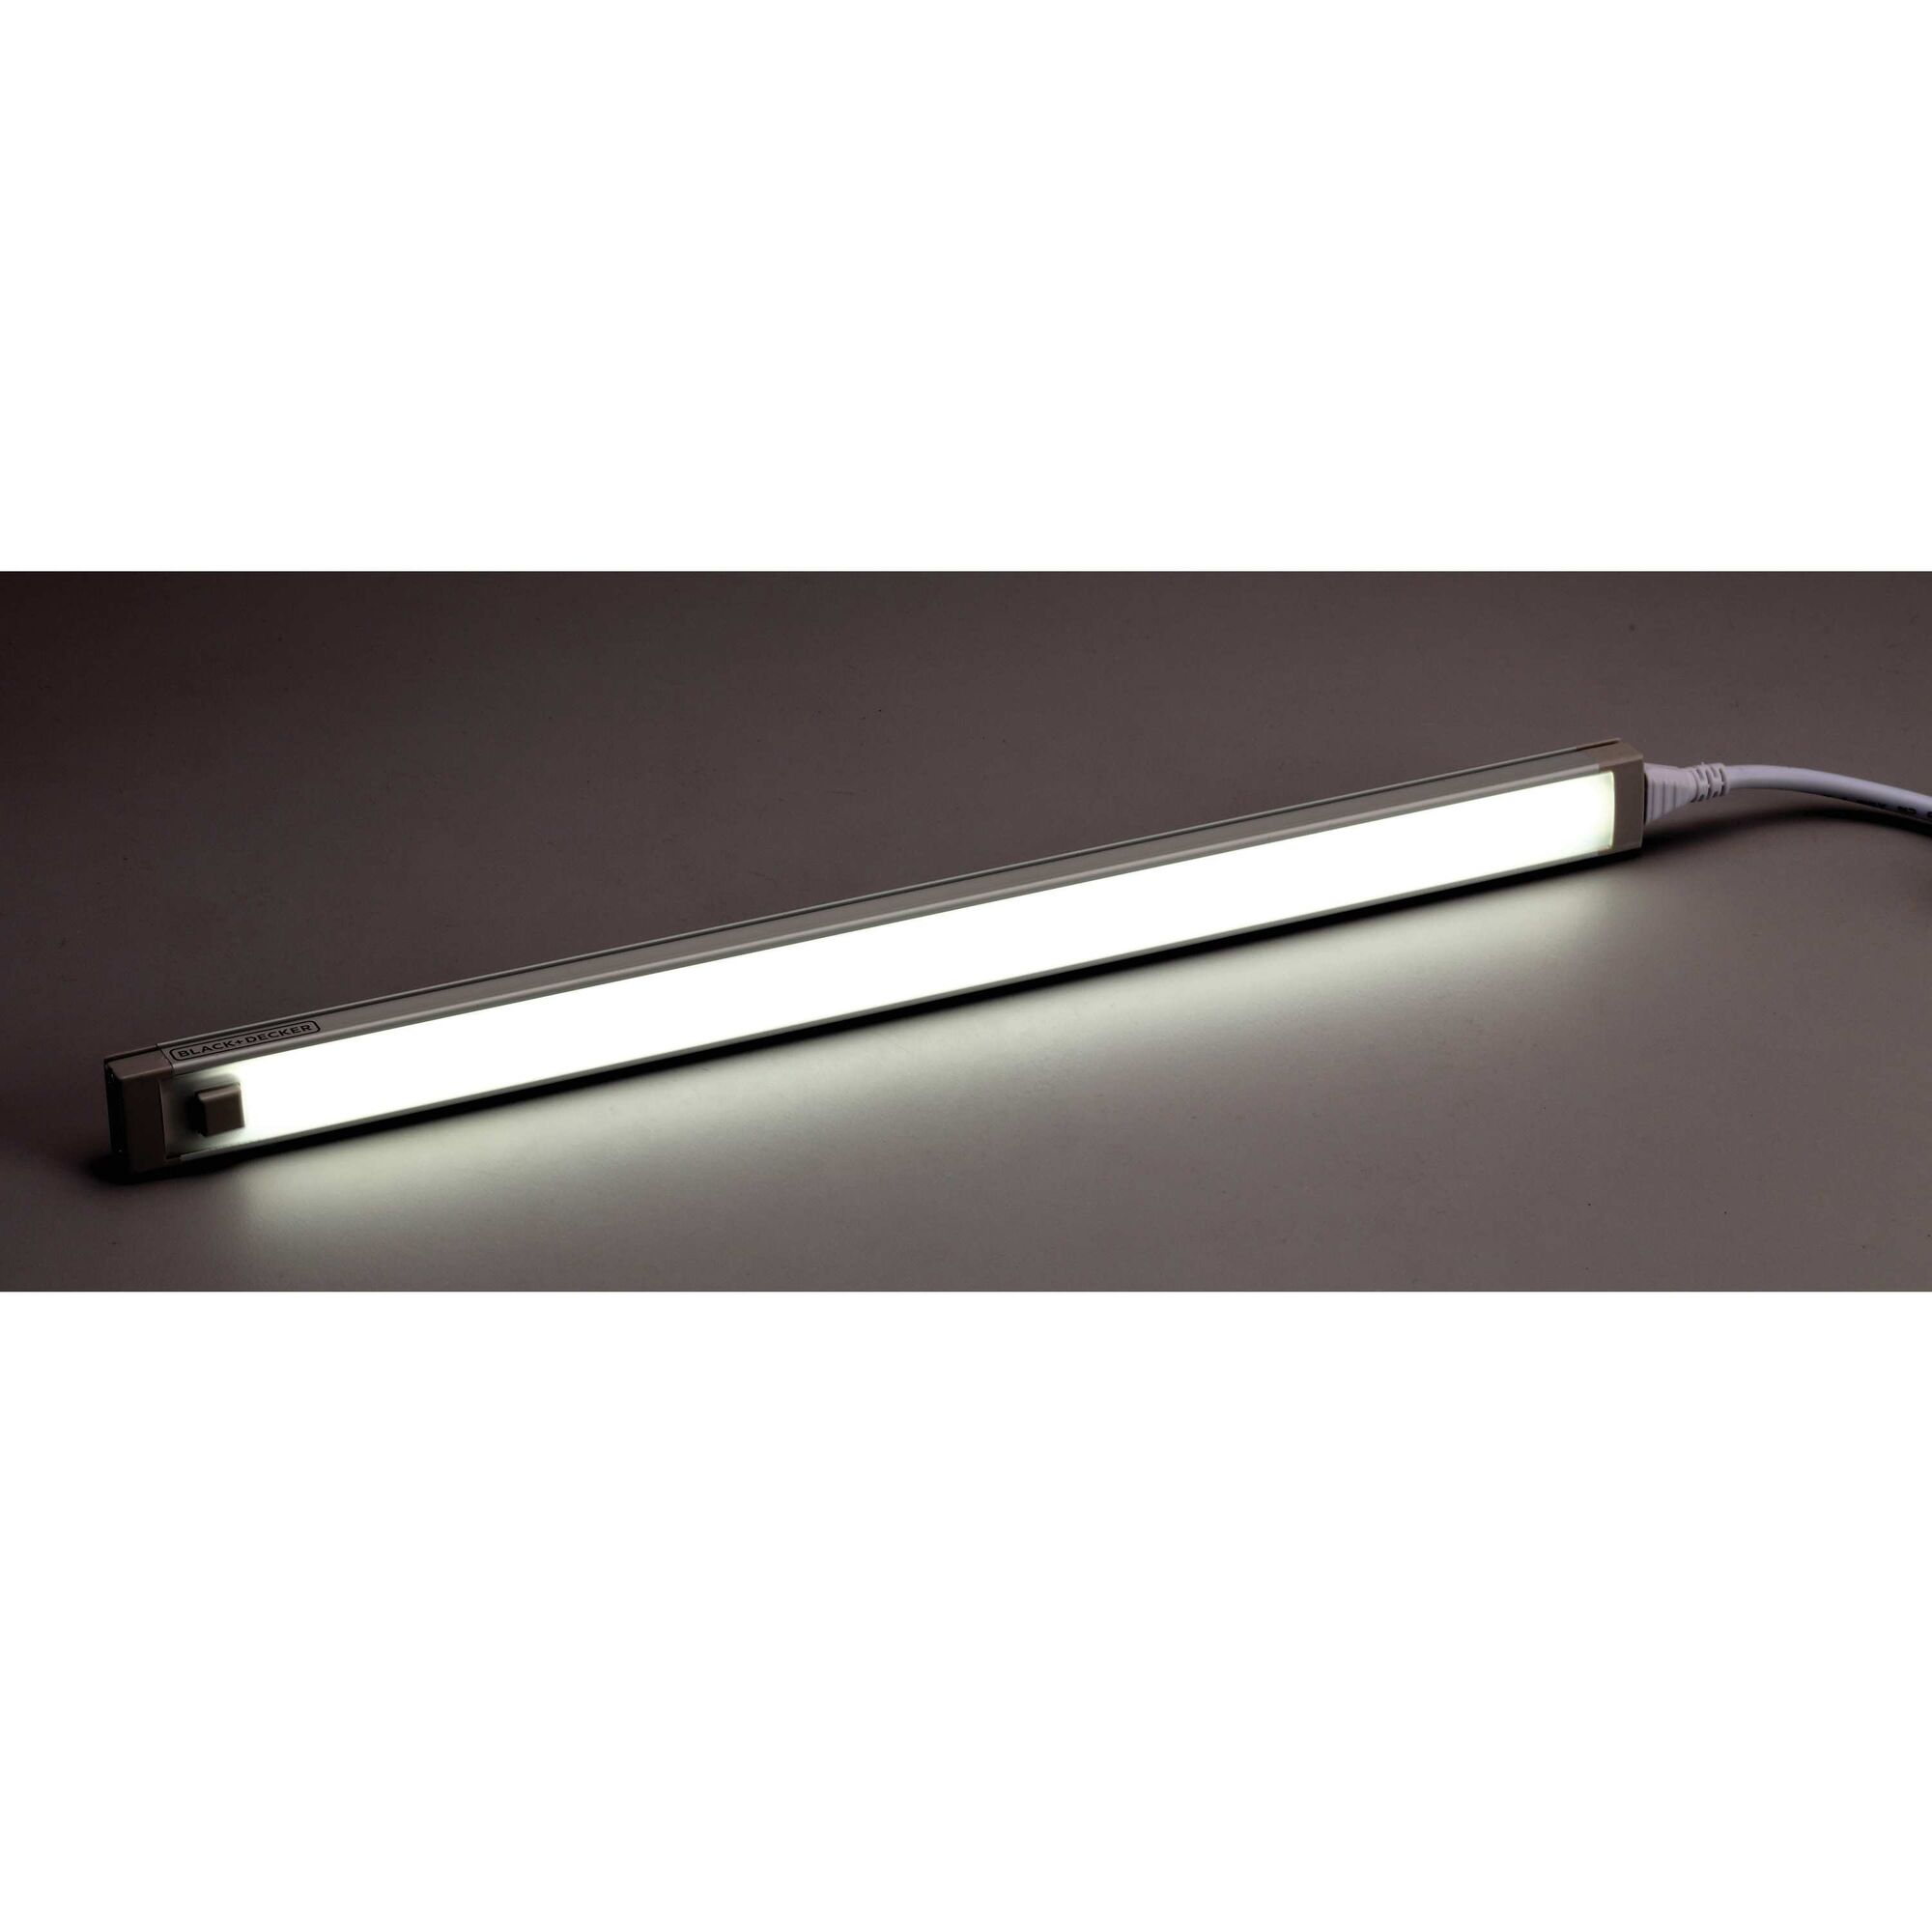 Ultra slim linkable design feature of 1 BAR L E D UNDER CABINET LIGHTING KIT COOL WHITE 9 inch.